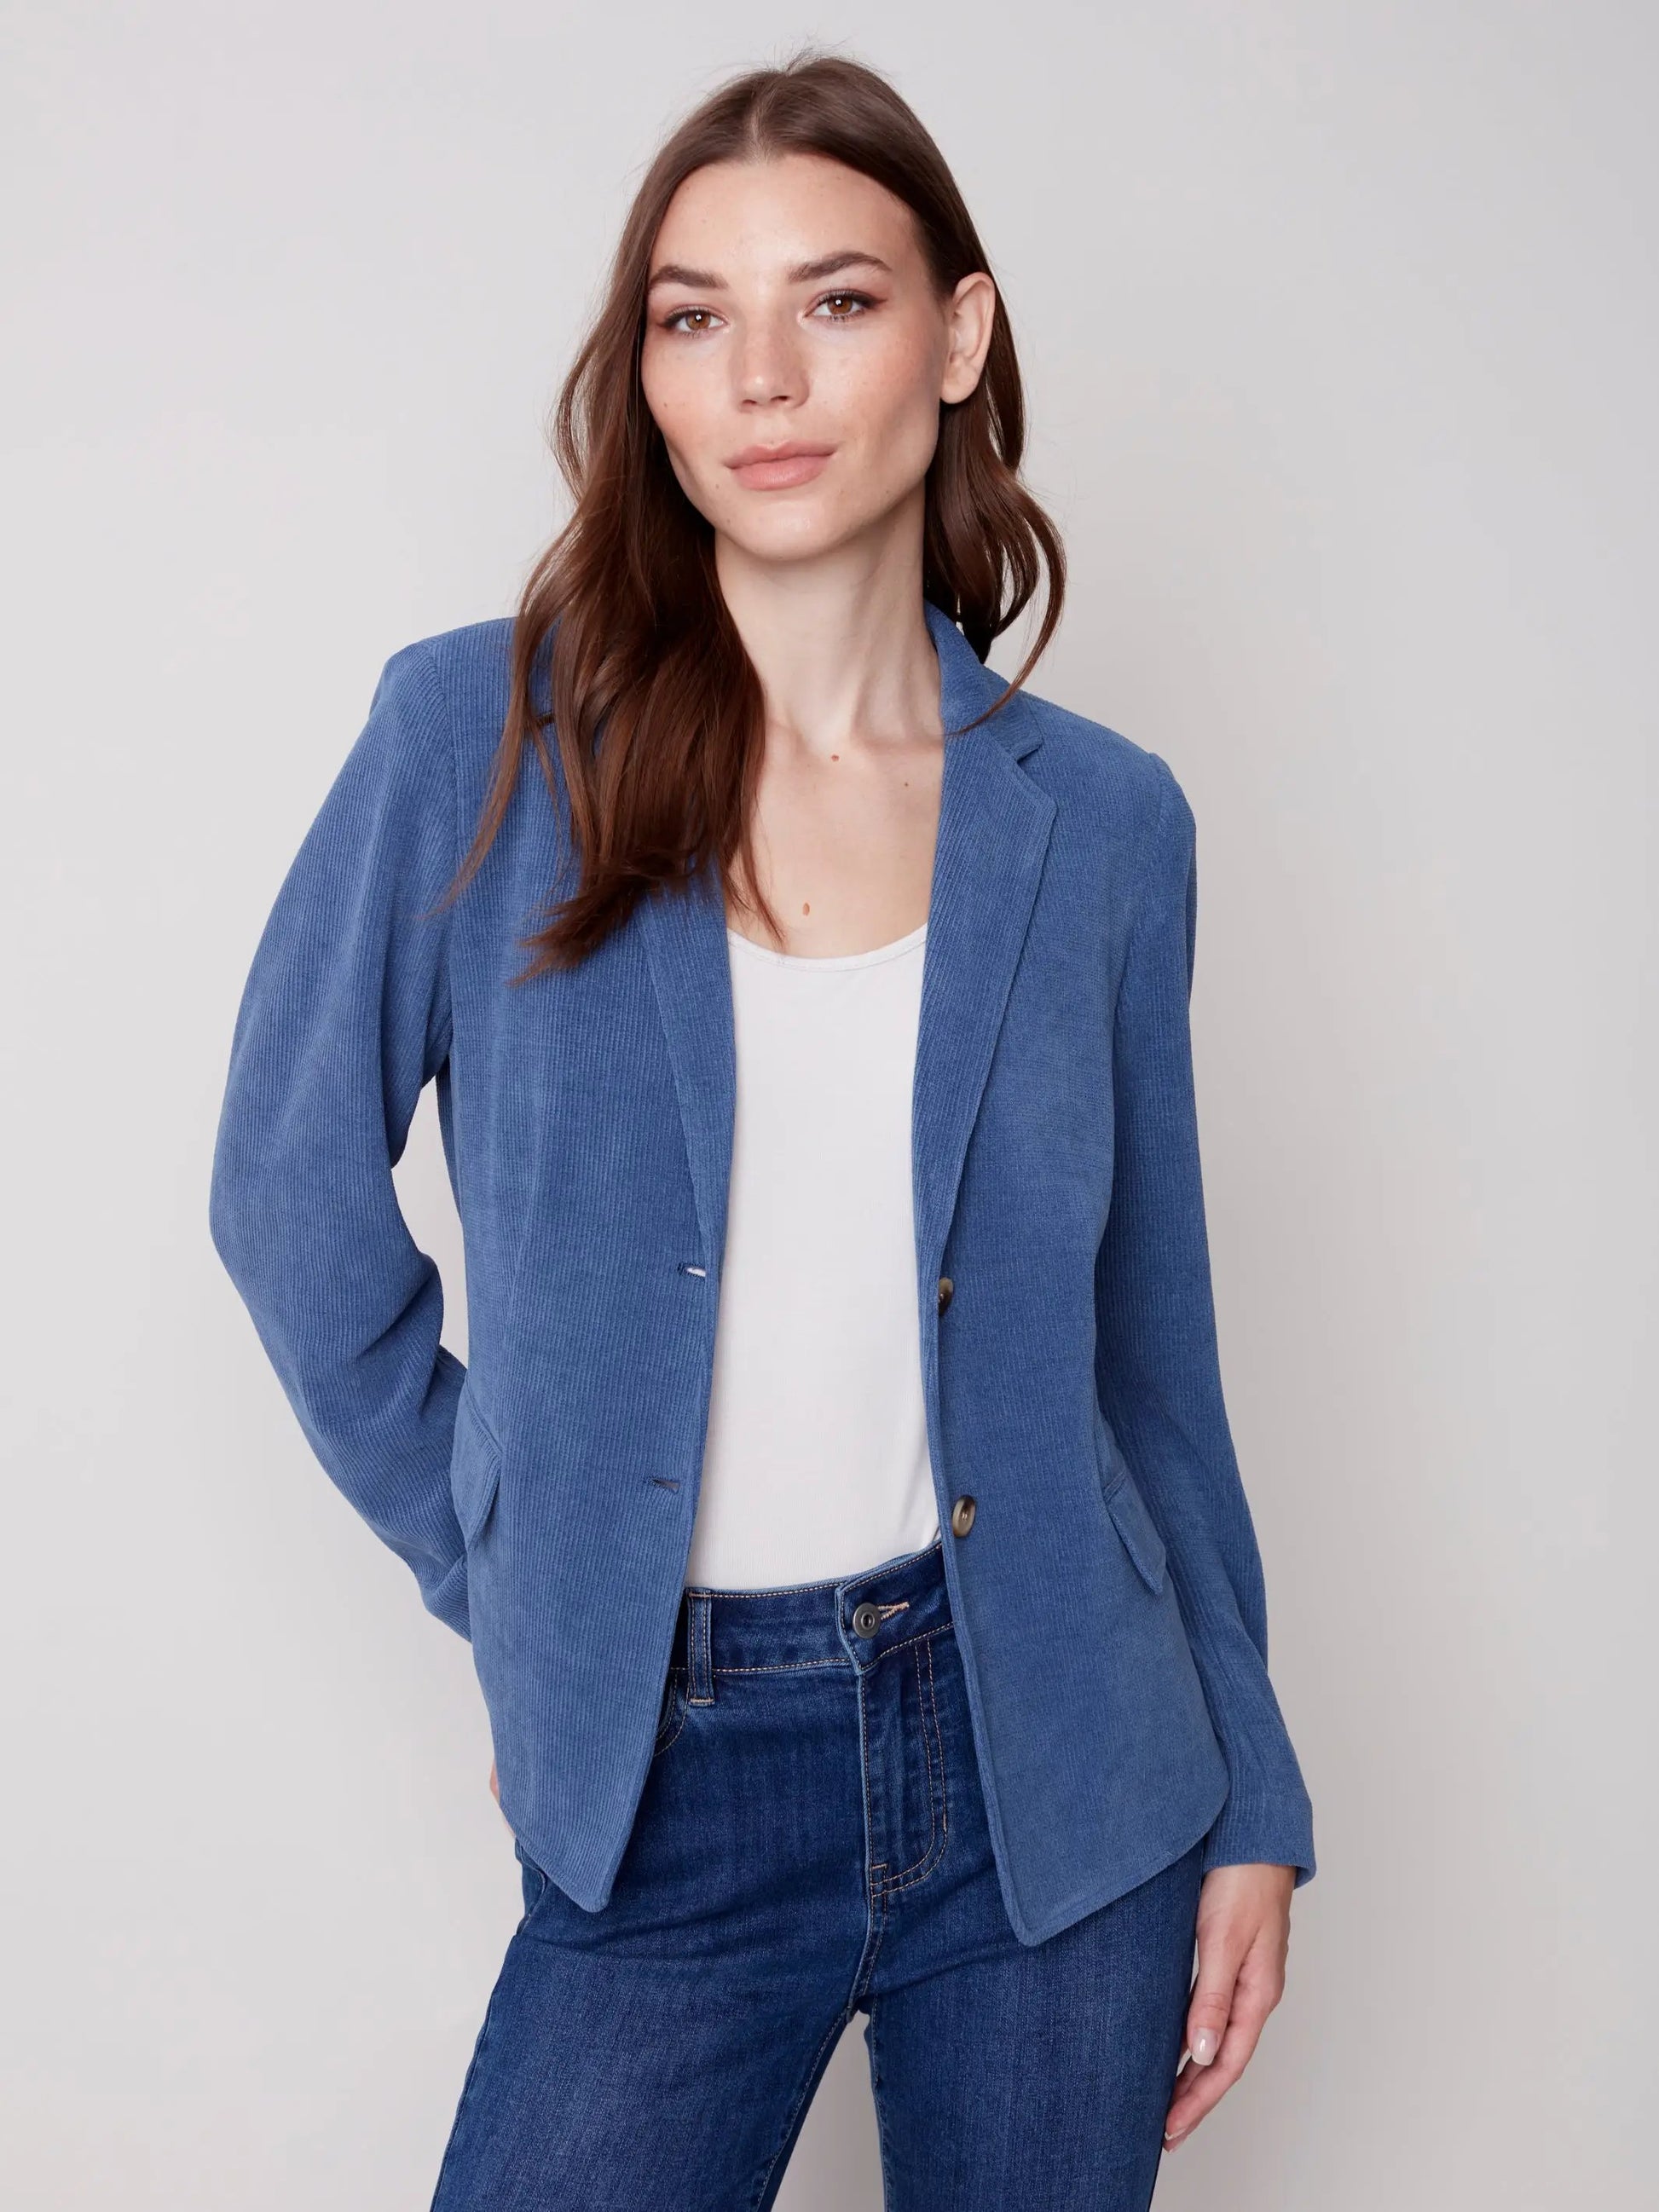 The model is wearing jeans and a Charlie B Buttoned-front Corduroy Blazer.